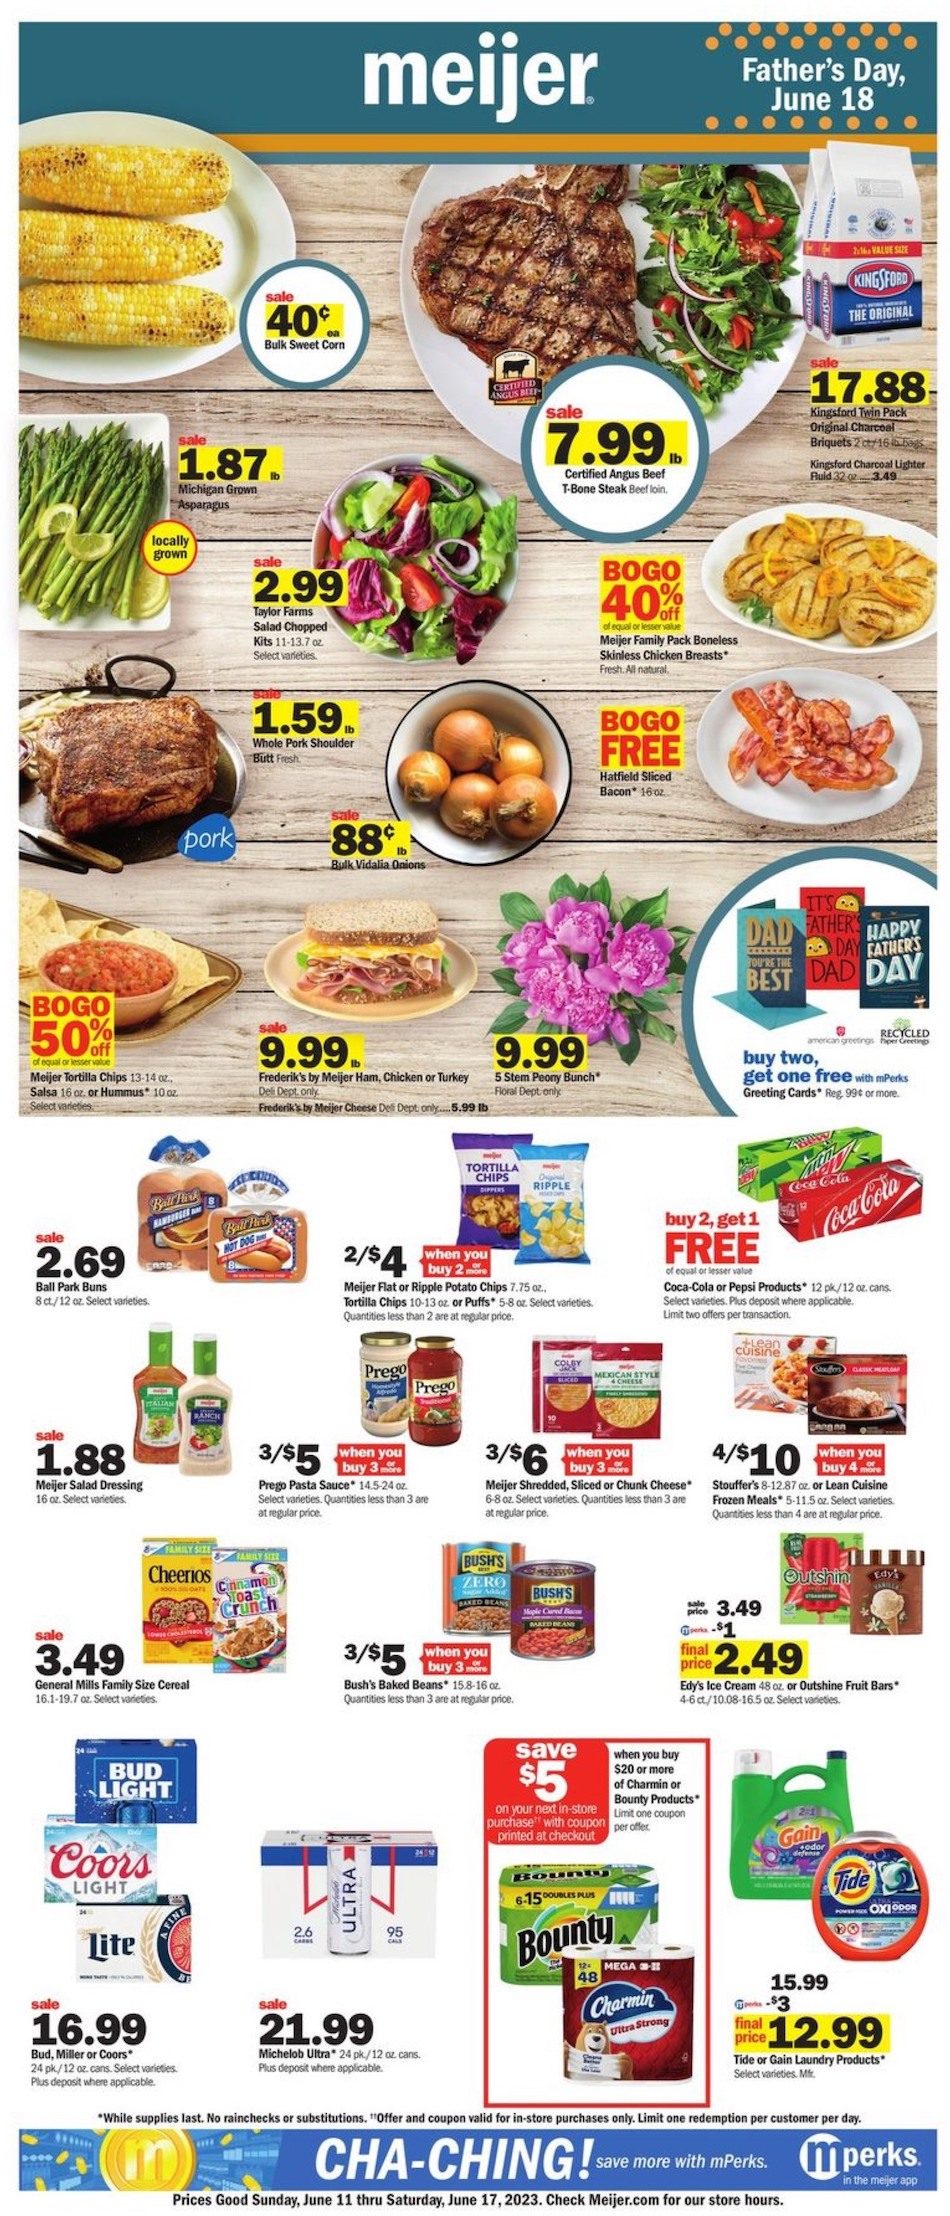 Meijer Weekly Ad 11th – 17th June 2023 Page 1